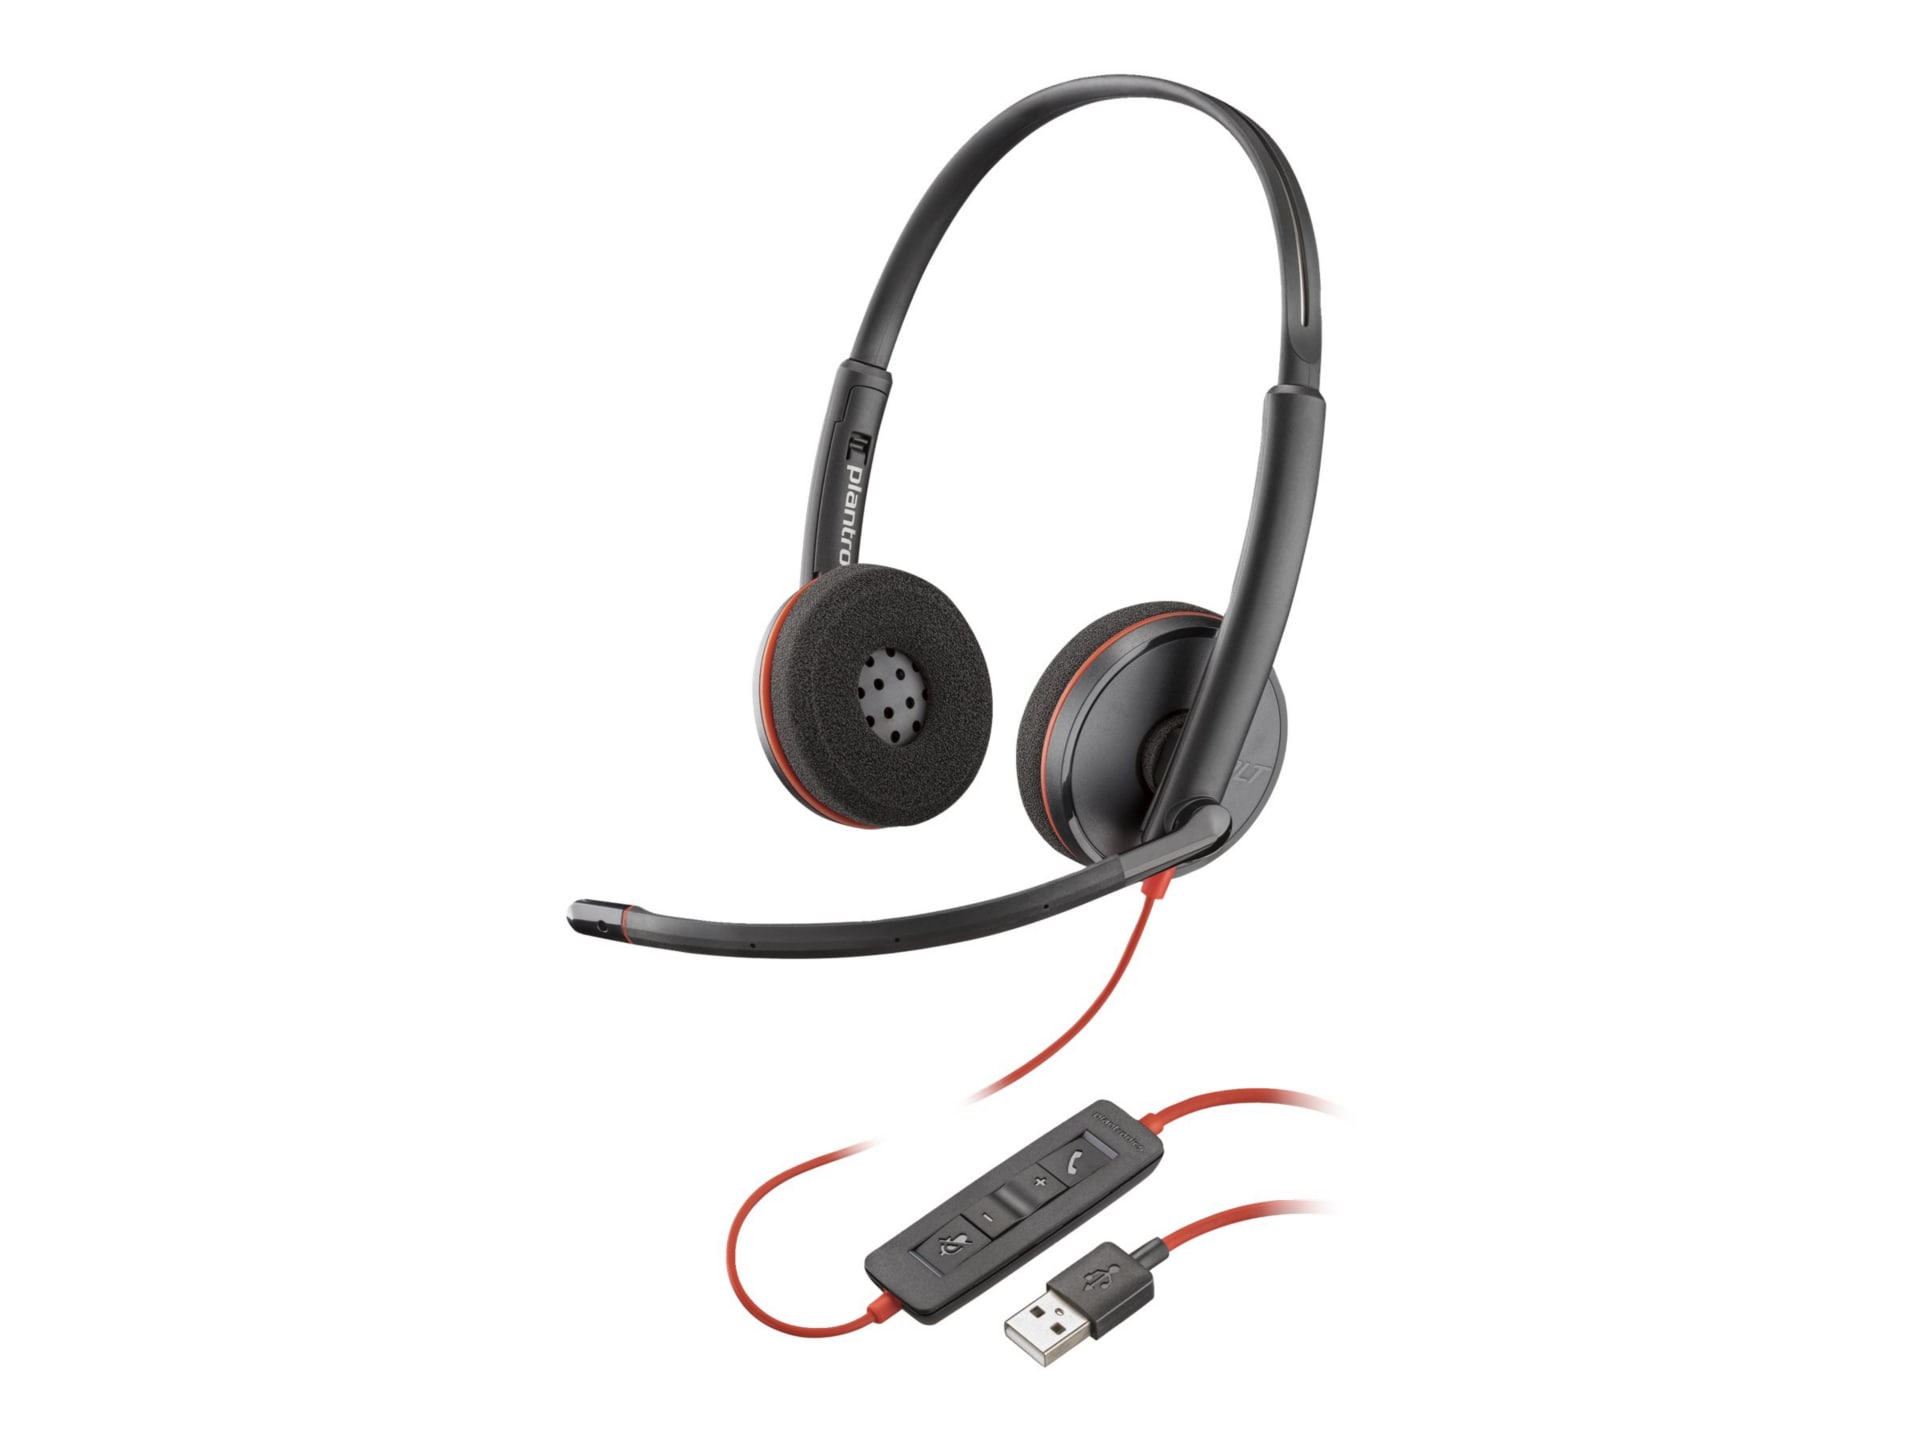 Poly Blackwire 3220 Headset